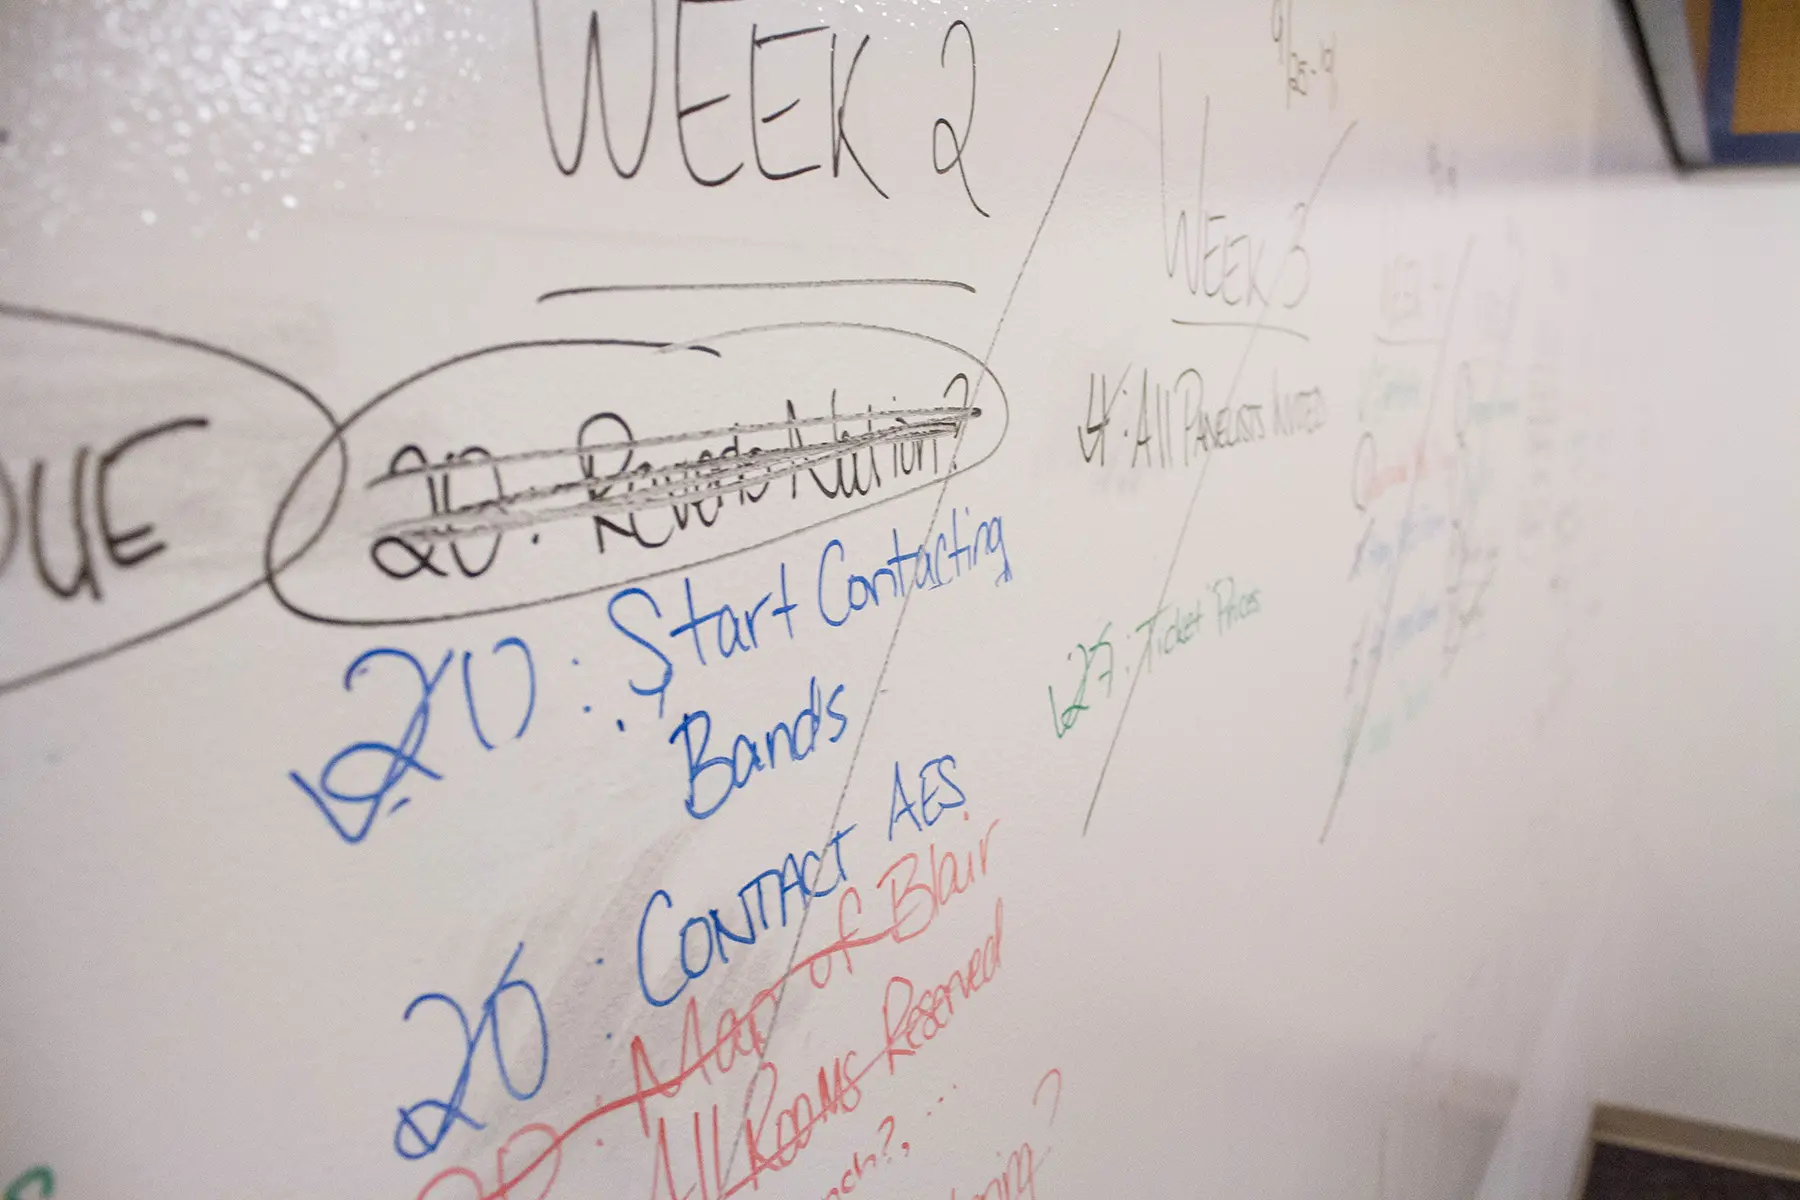 Whiteboard with music business notes